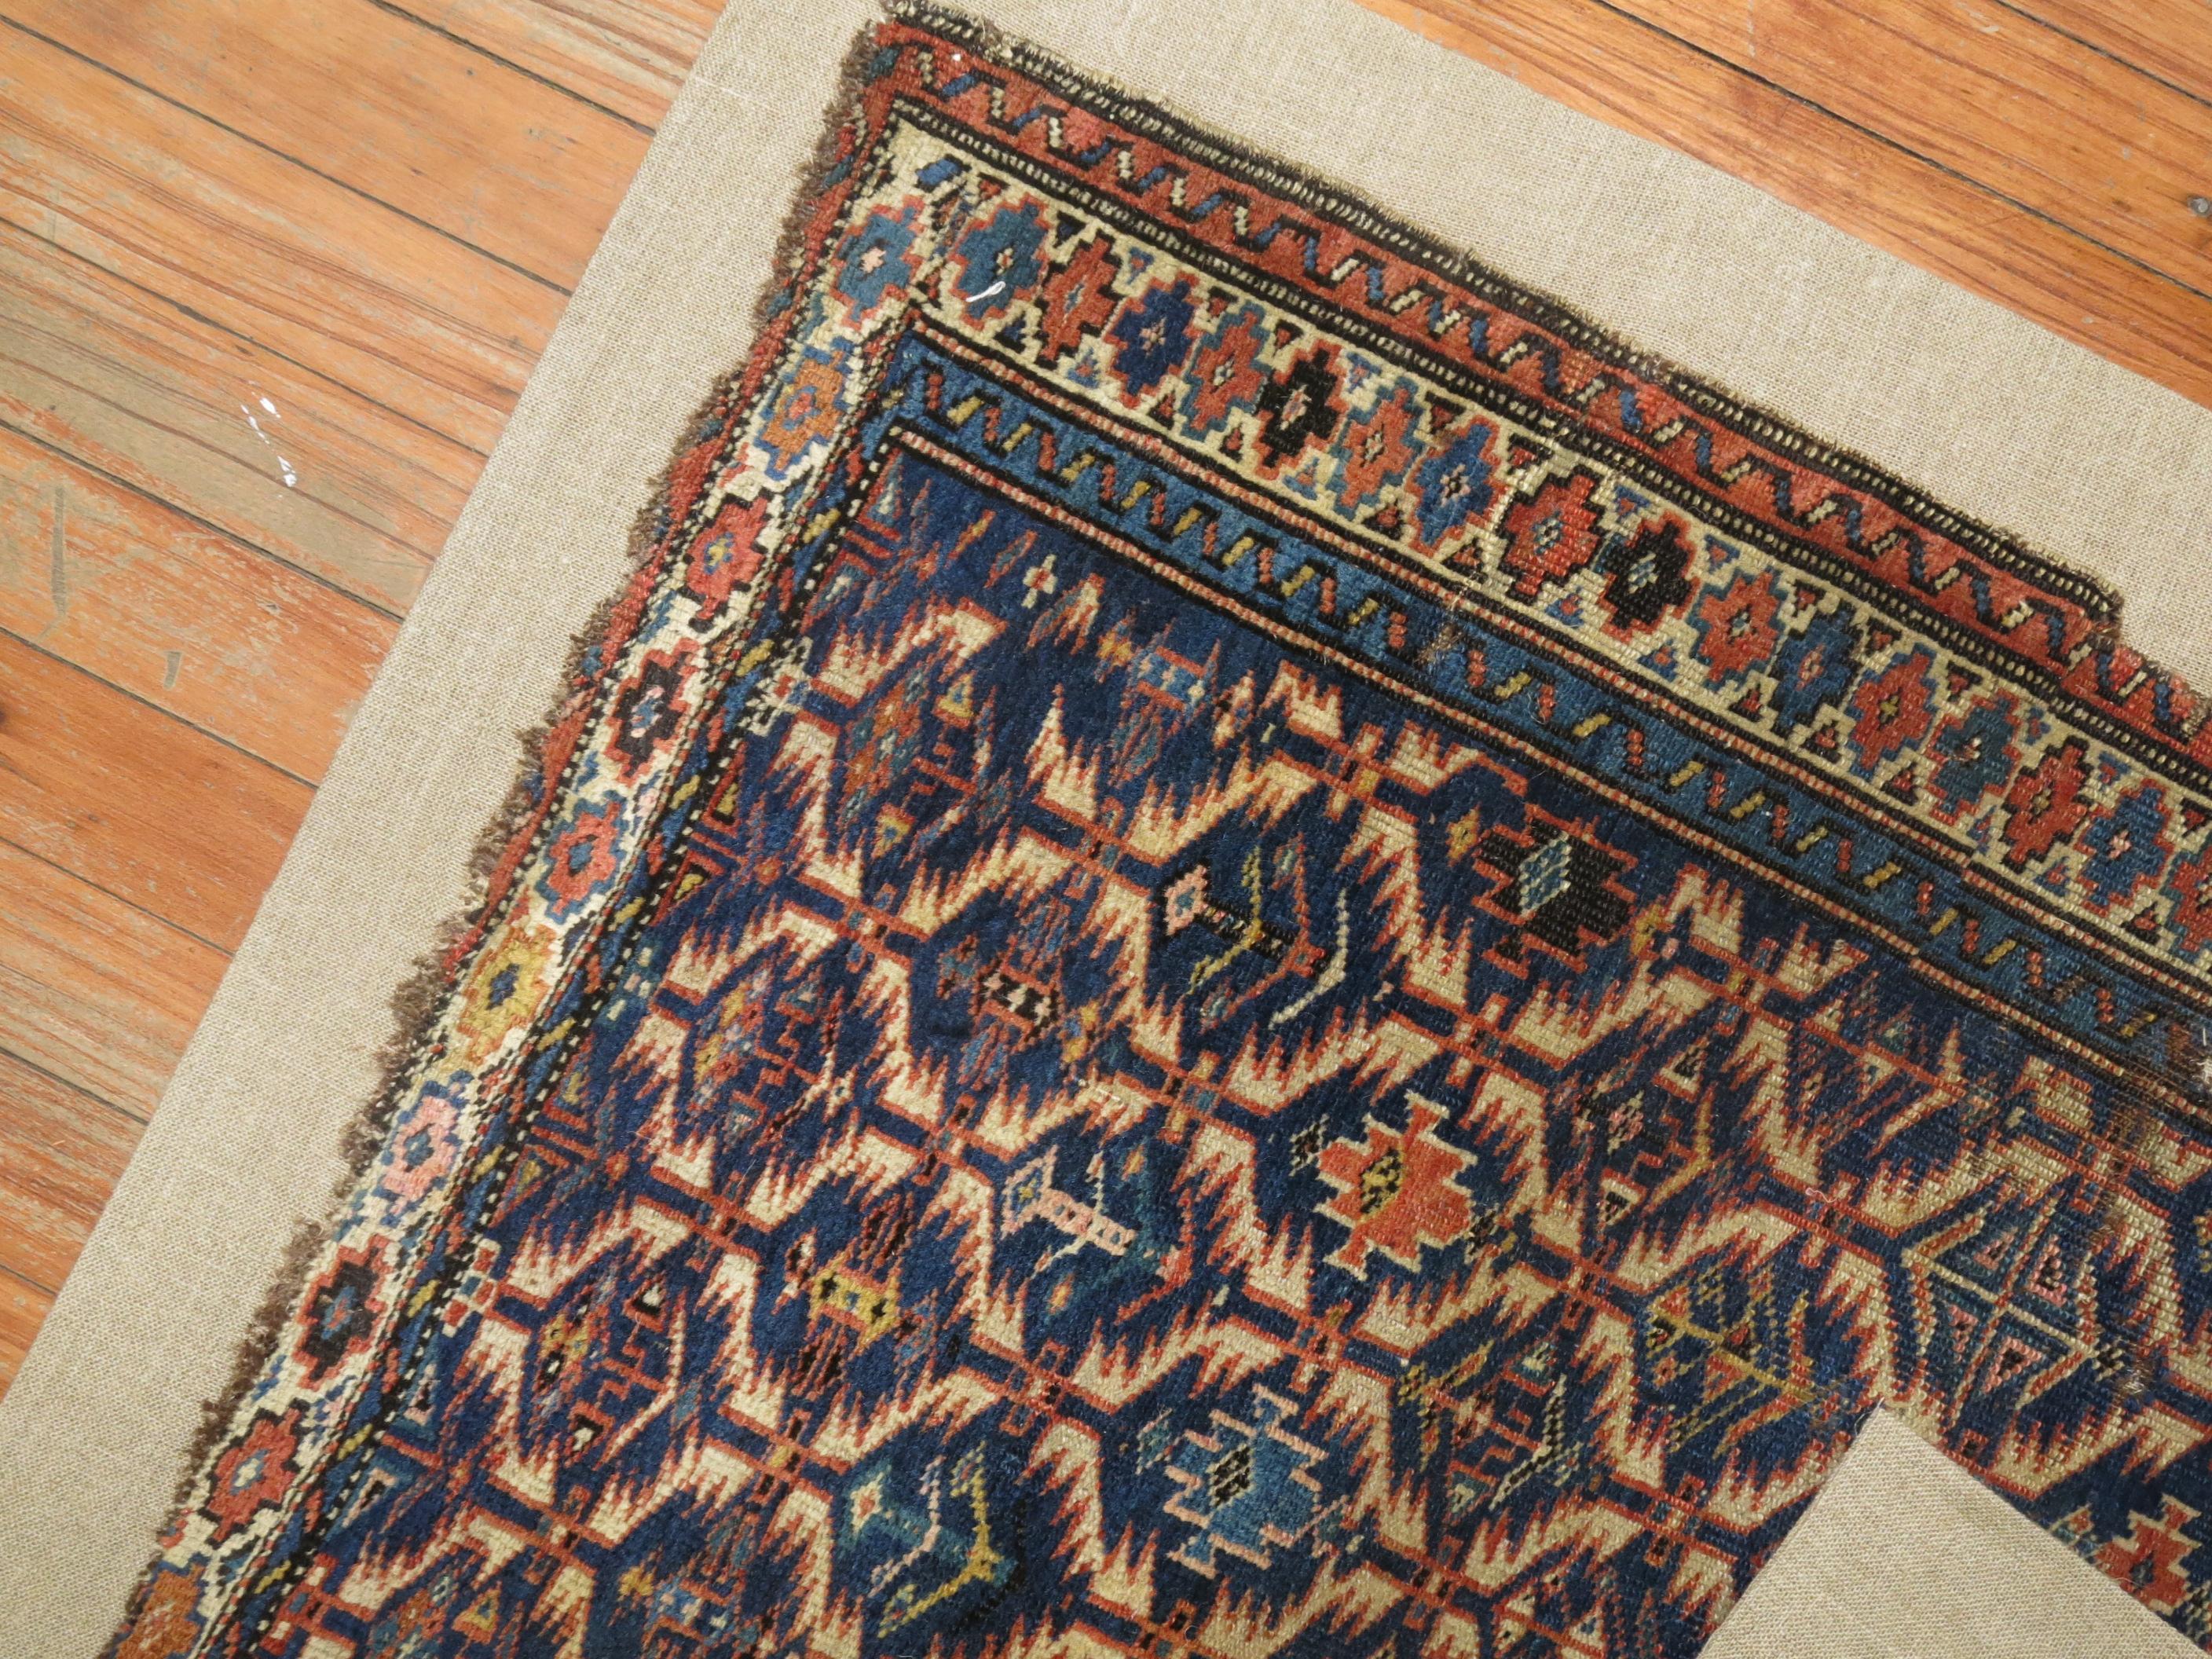 A mid-19th century Caucasian Kuba rug hand stitched onto a canvas like Linen Fabric. This item can either be used as a wall piece or floor covering. It can be walked on if desired.